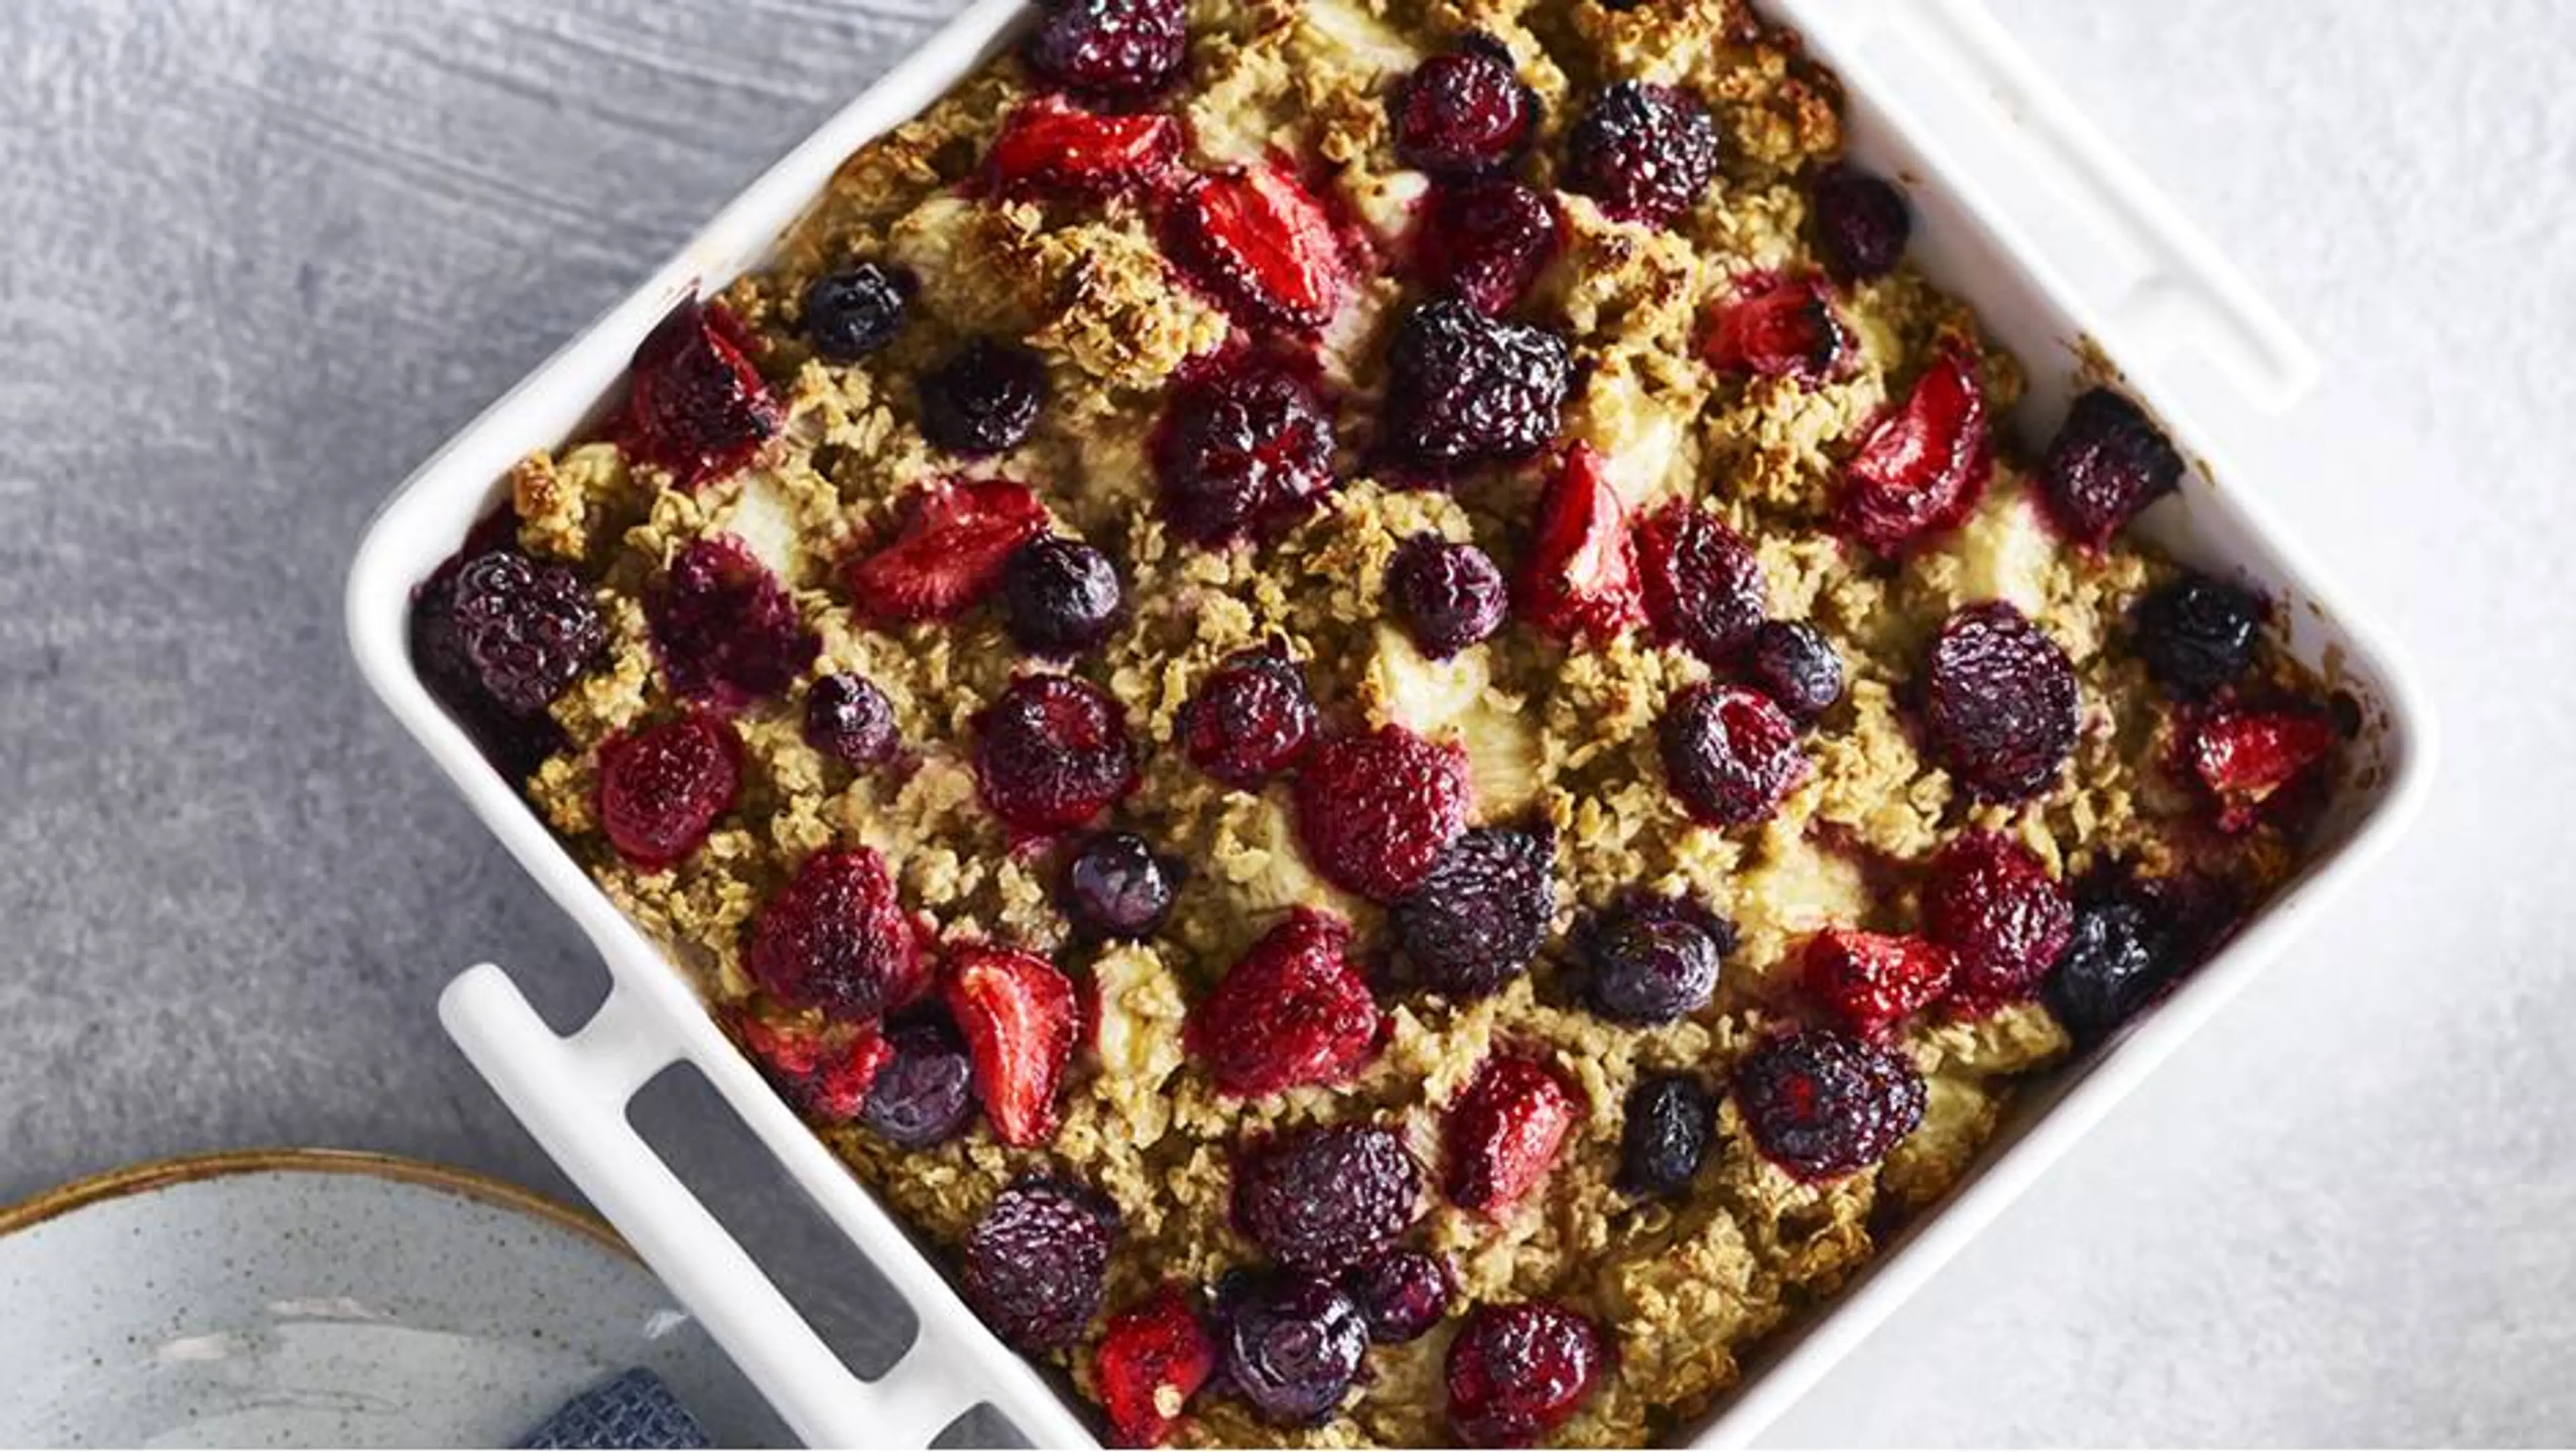 Baked Oatmeal with Bananas and Berries